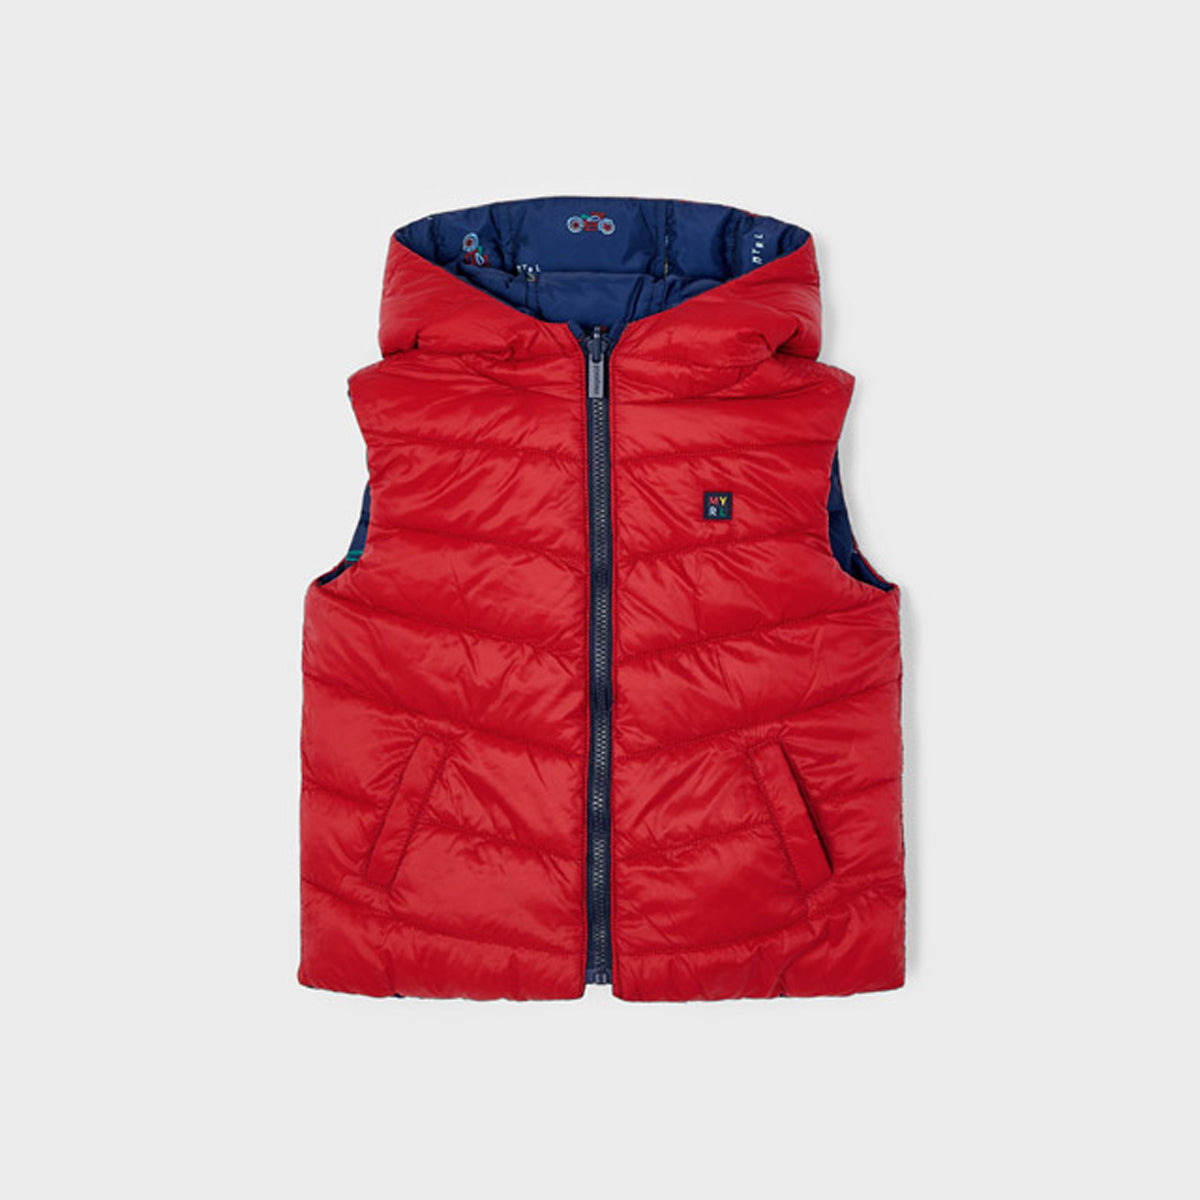 Navy Cars Reversible Quilted Vest